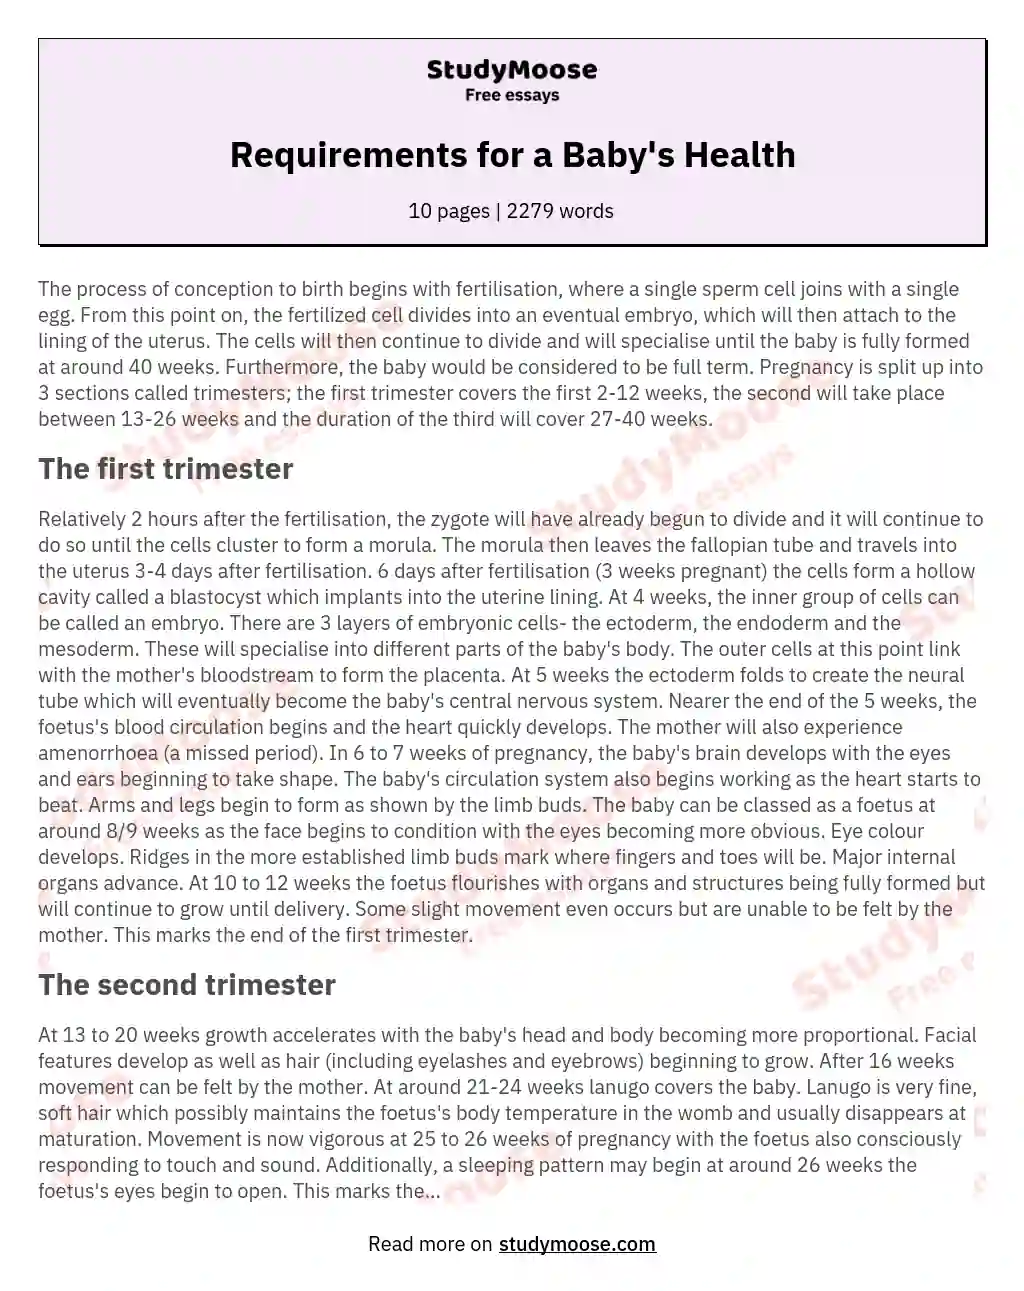 Requirements for a Baby's Health essay